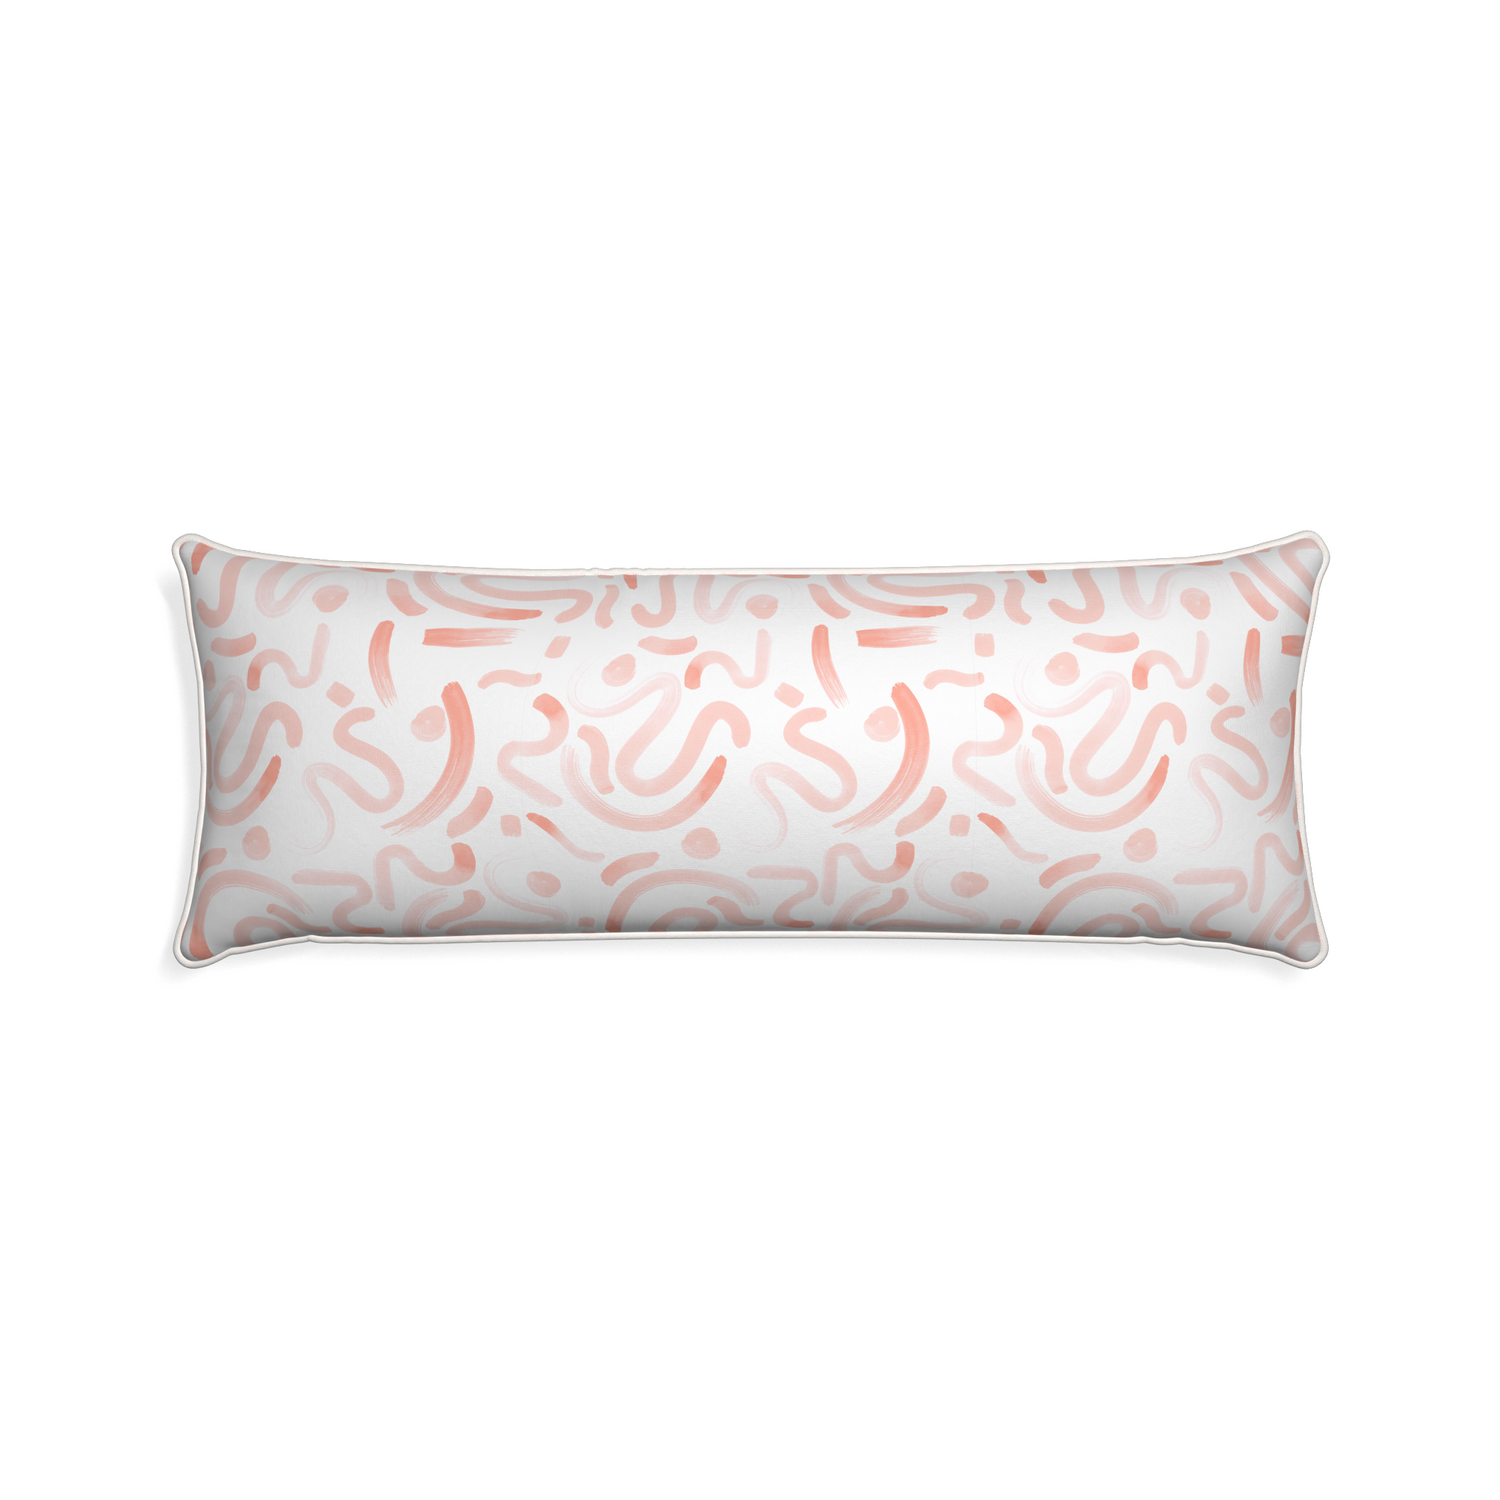 Xl-lumbar hockney pink custom pillow with snow piping on white background